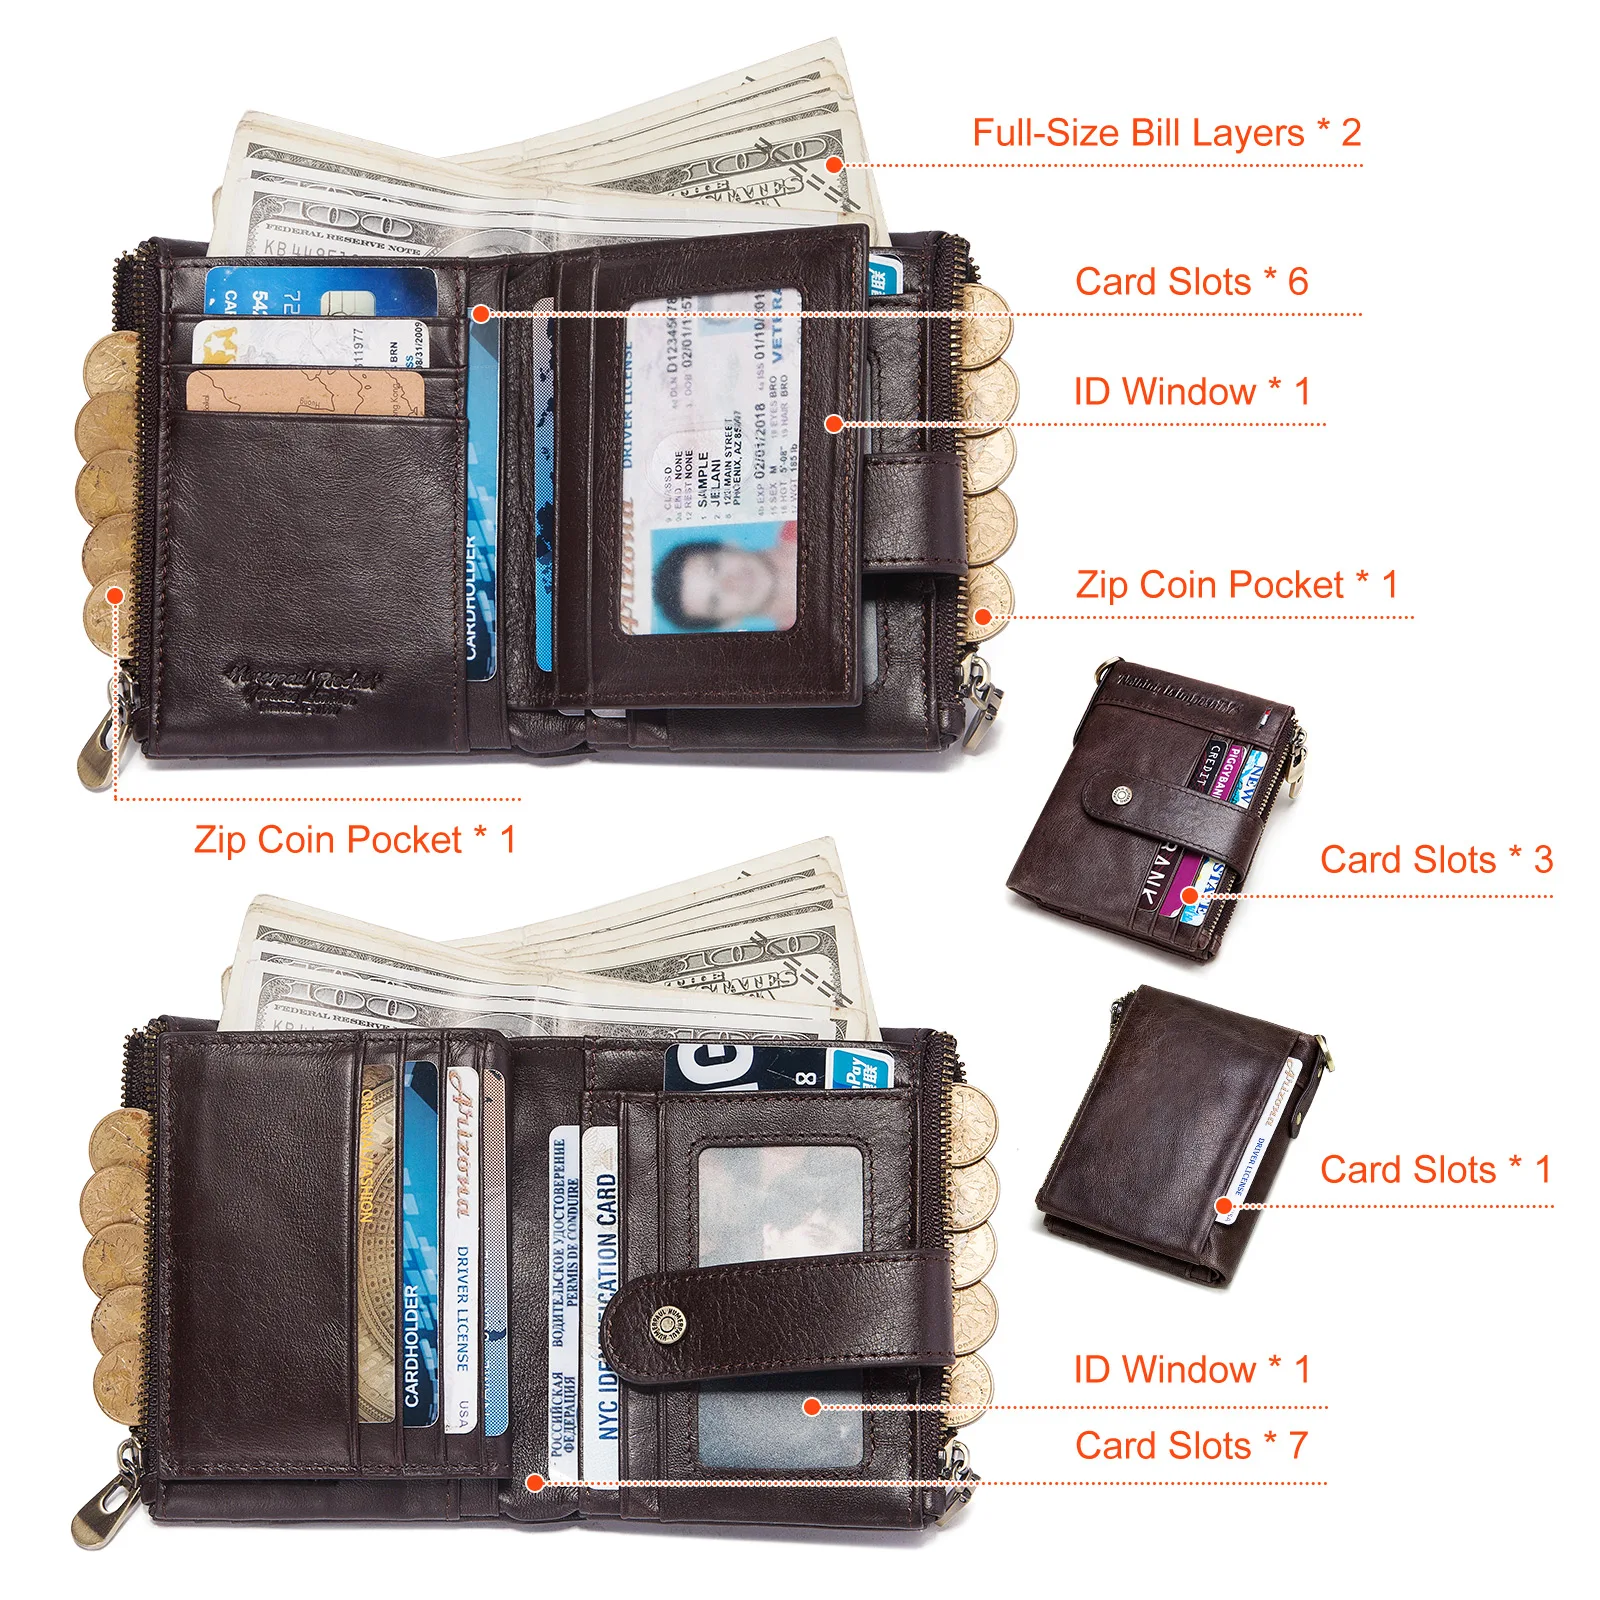 HUMERPAUL Cardholder Wallet Men RFID Genuine Leather Organizer Wallets with Coin Pocket Short Desigh Clutch Purse with ID Window